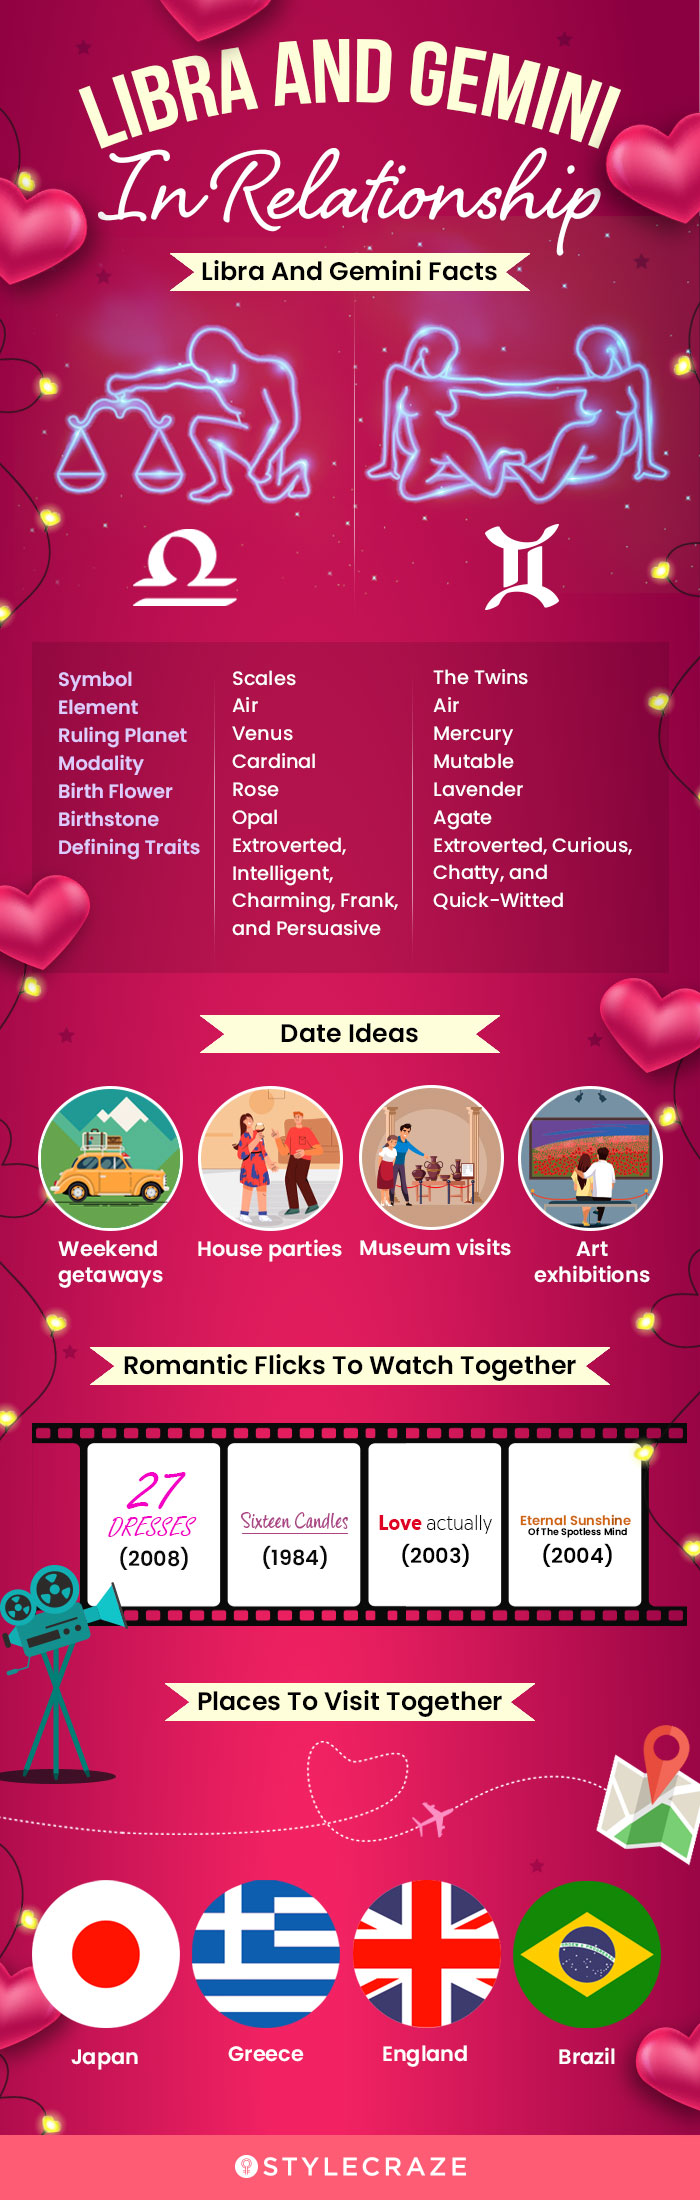 libra and gemini in relationship (infographic)